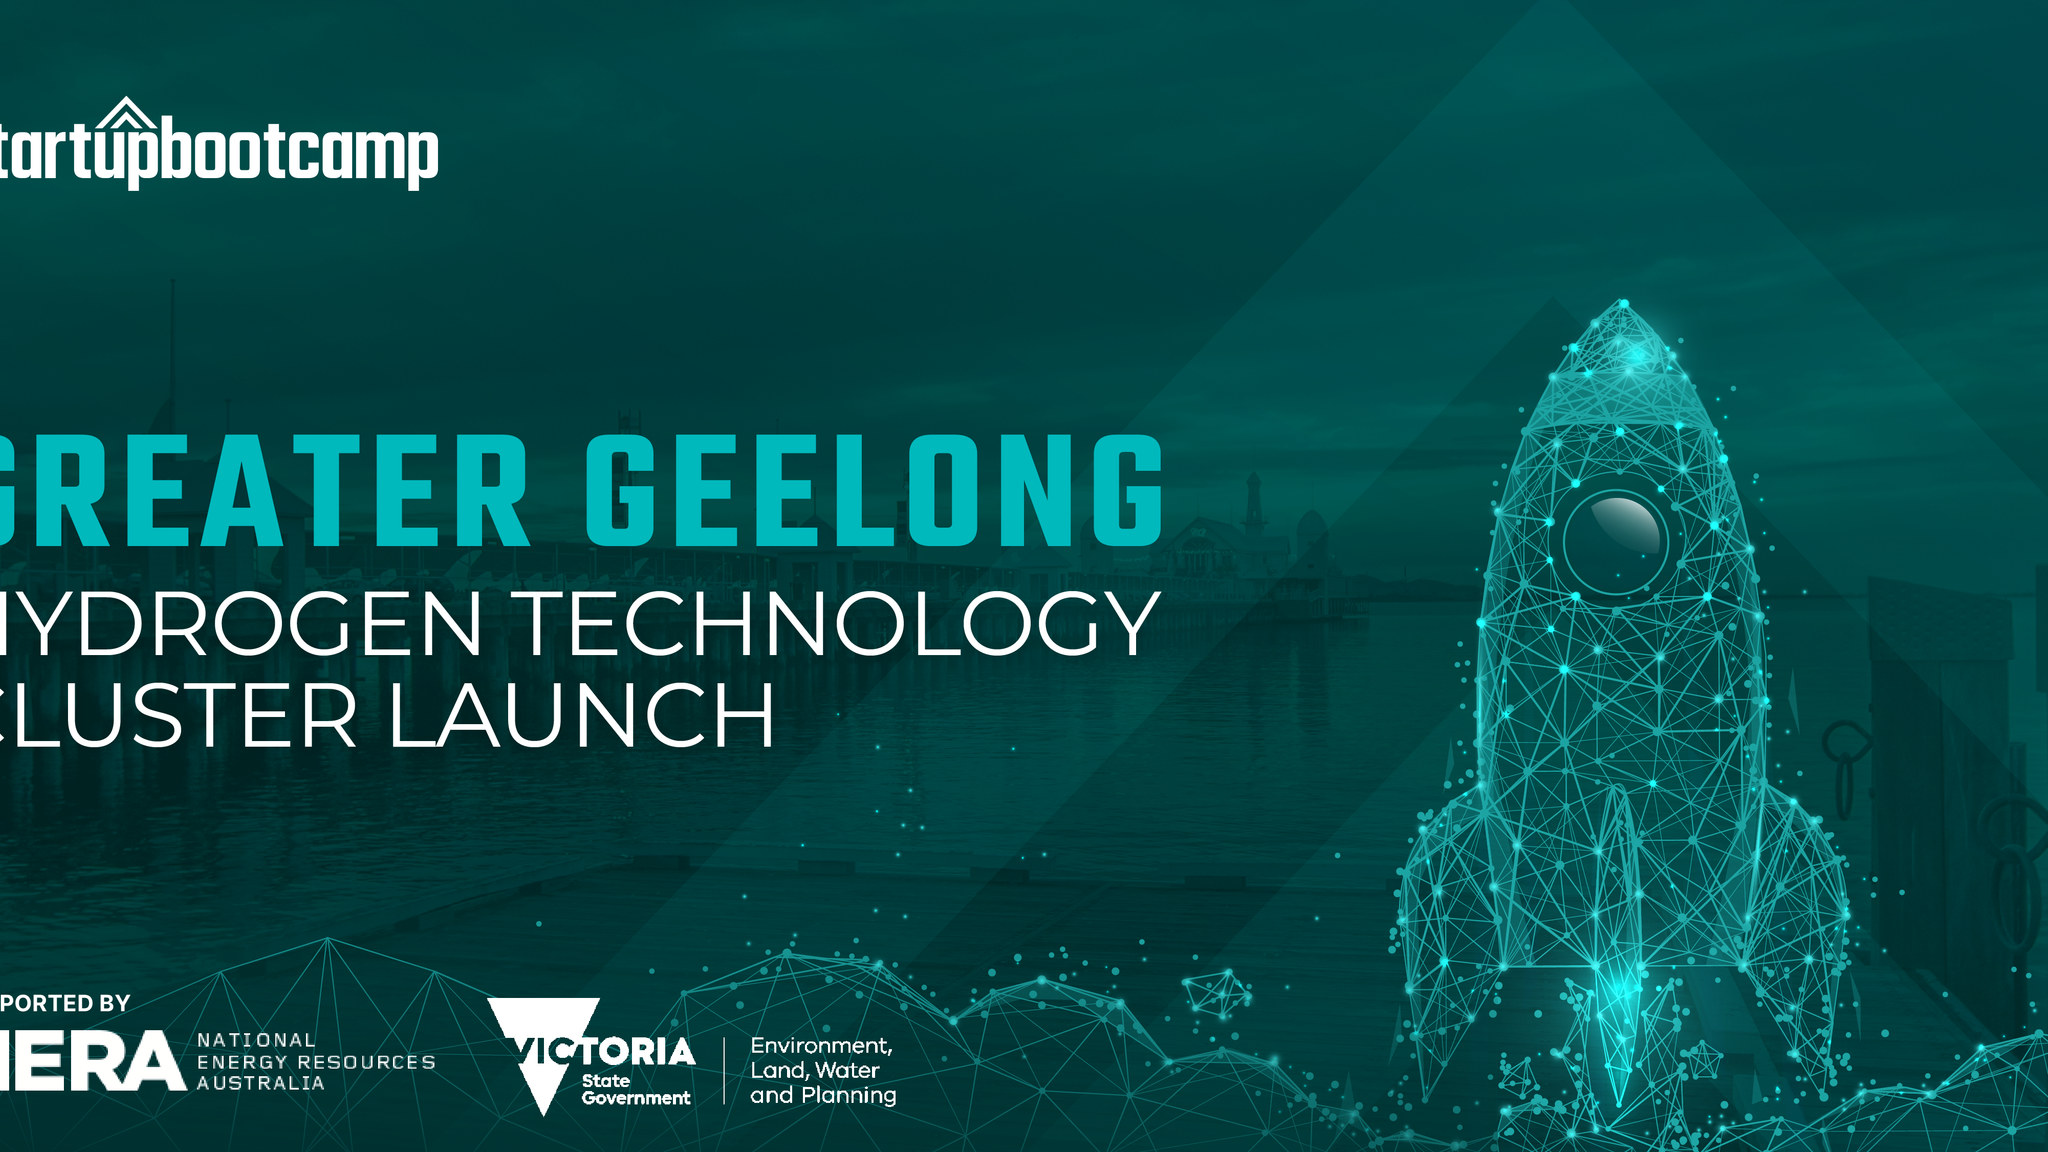 Startupbootcamp Maps the World of Hydrogen Startups as it Launches Hydrogen Technology Cluster in Greater Geelong